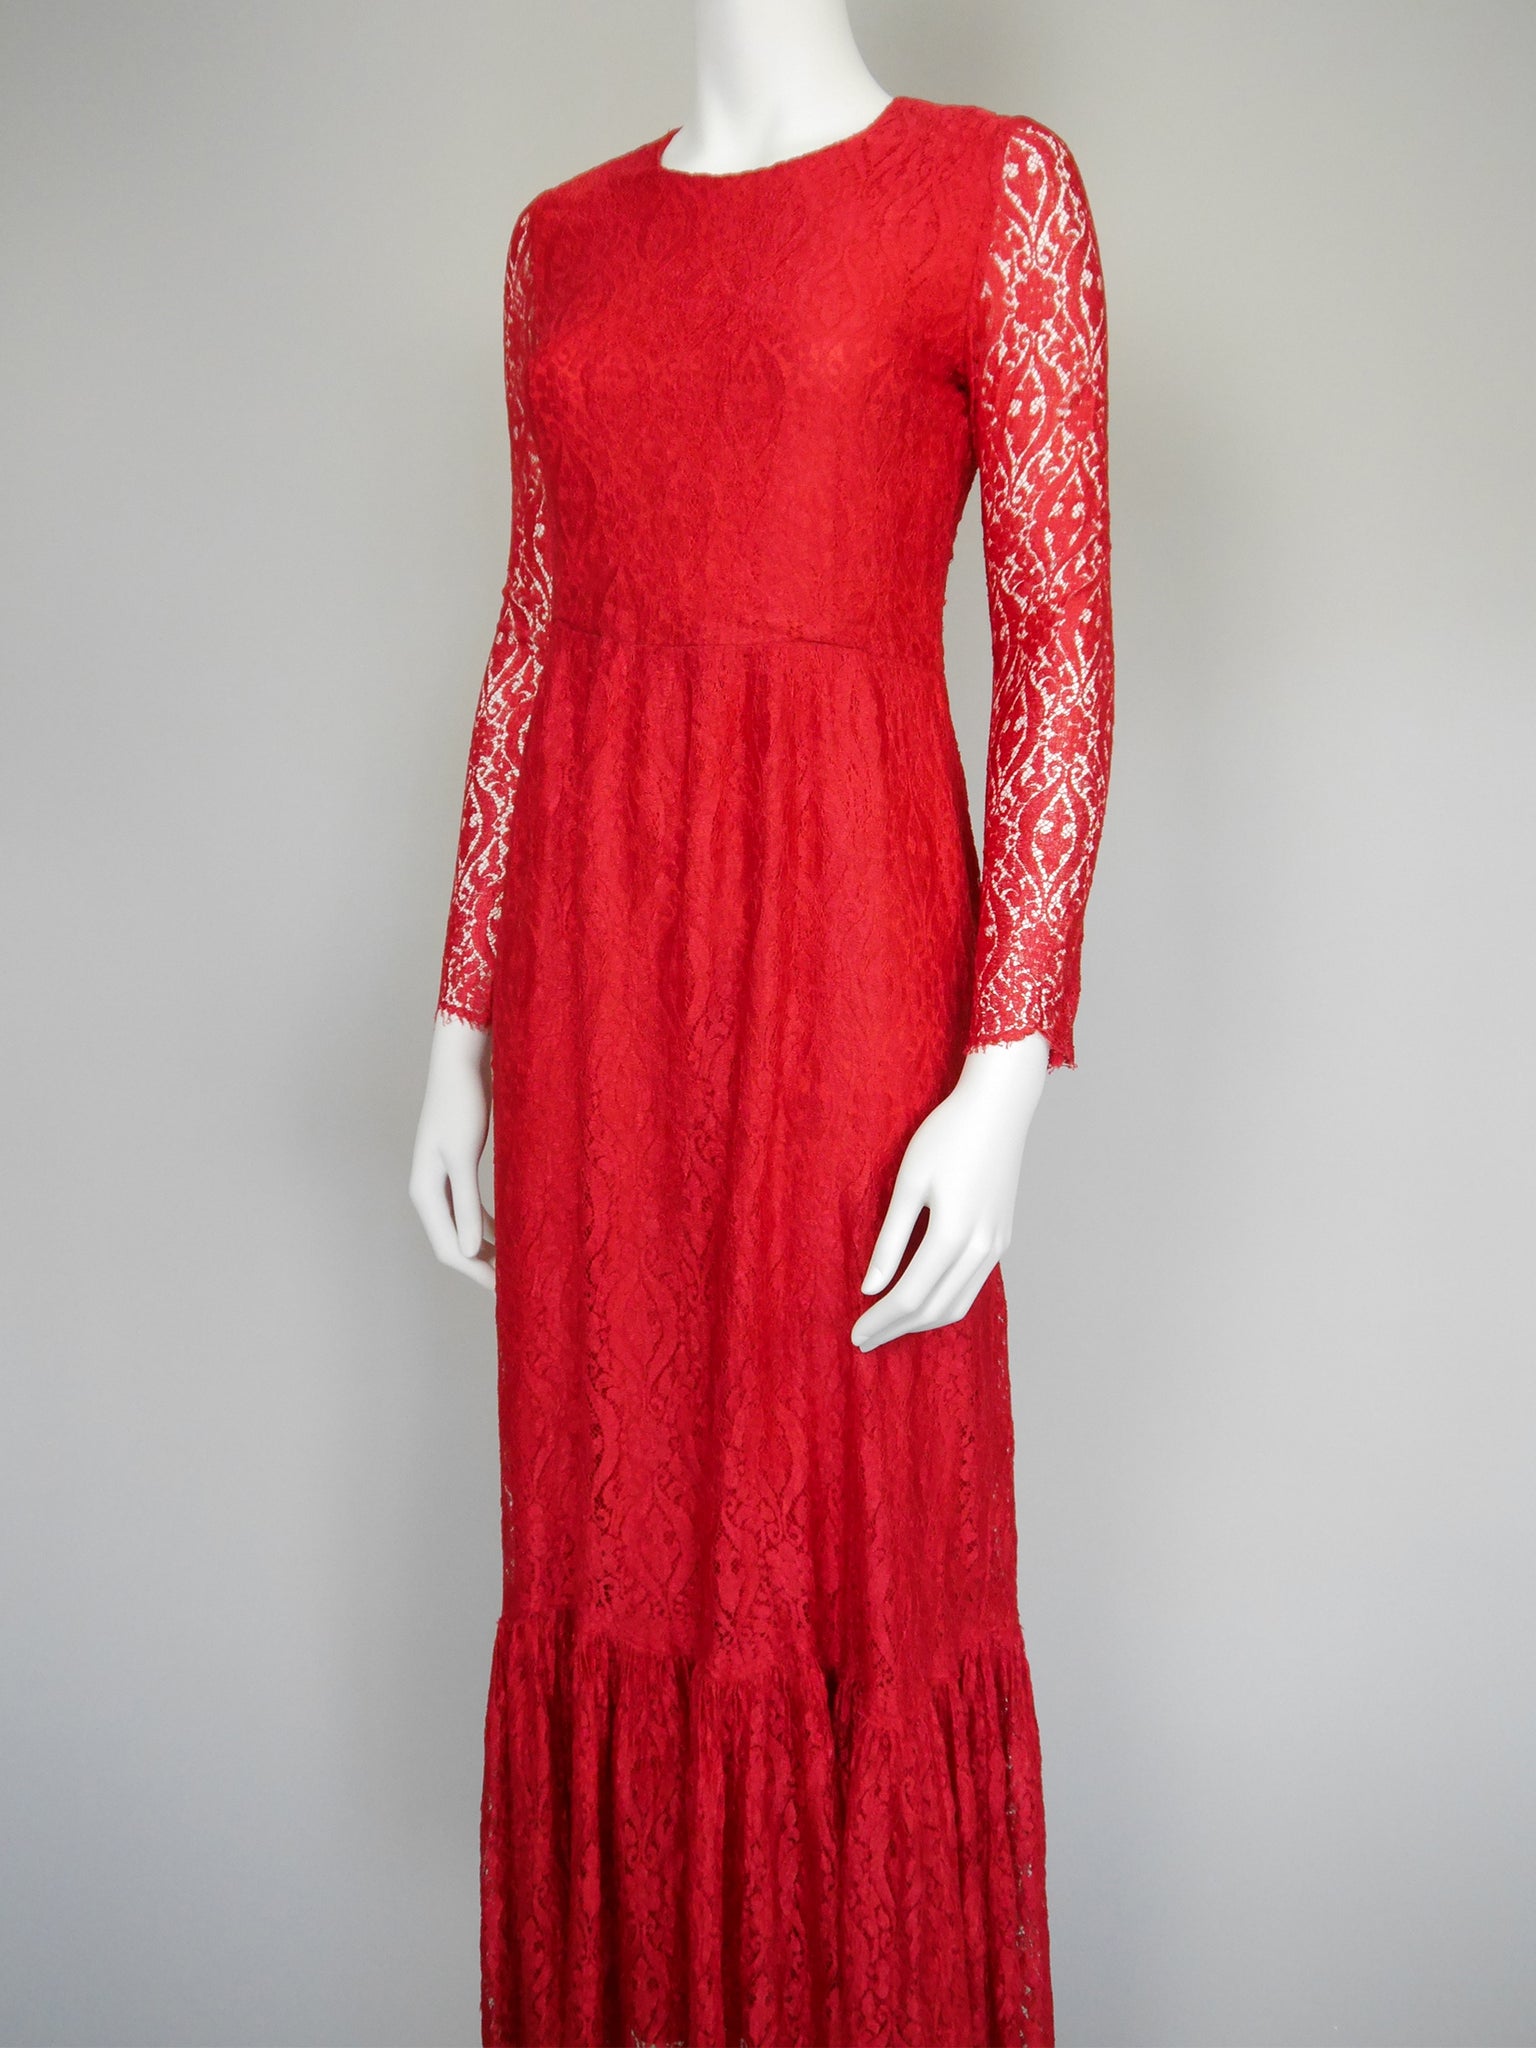 MISS DIOR by Christian Dior c. 1970 Vintage Red Lace Maxi Evening Gown Size S